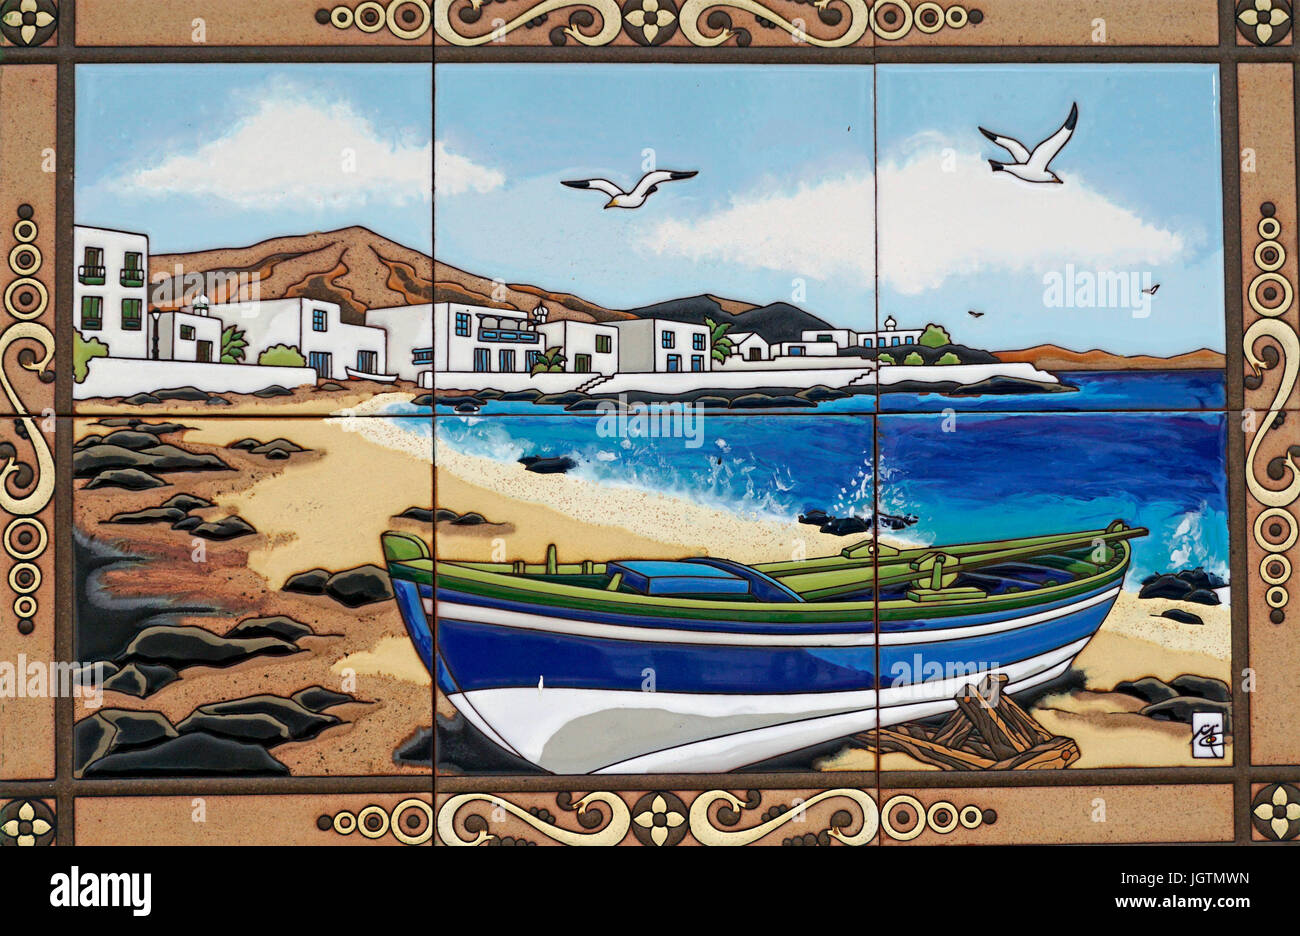 Tile picture shows a coast landscape with fishing boat, Puerto del Carmen, Lanzarote, Canary islands, Europe Stock Photo